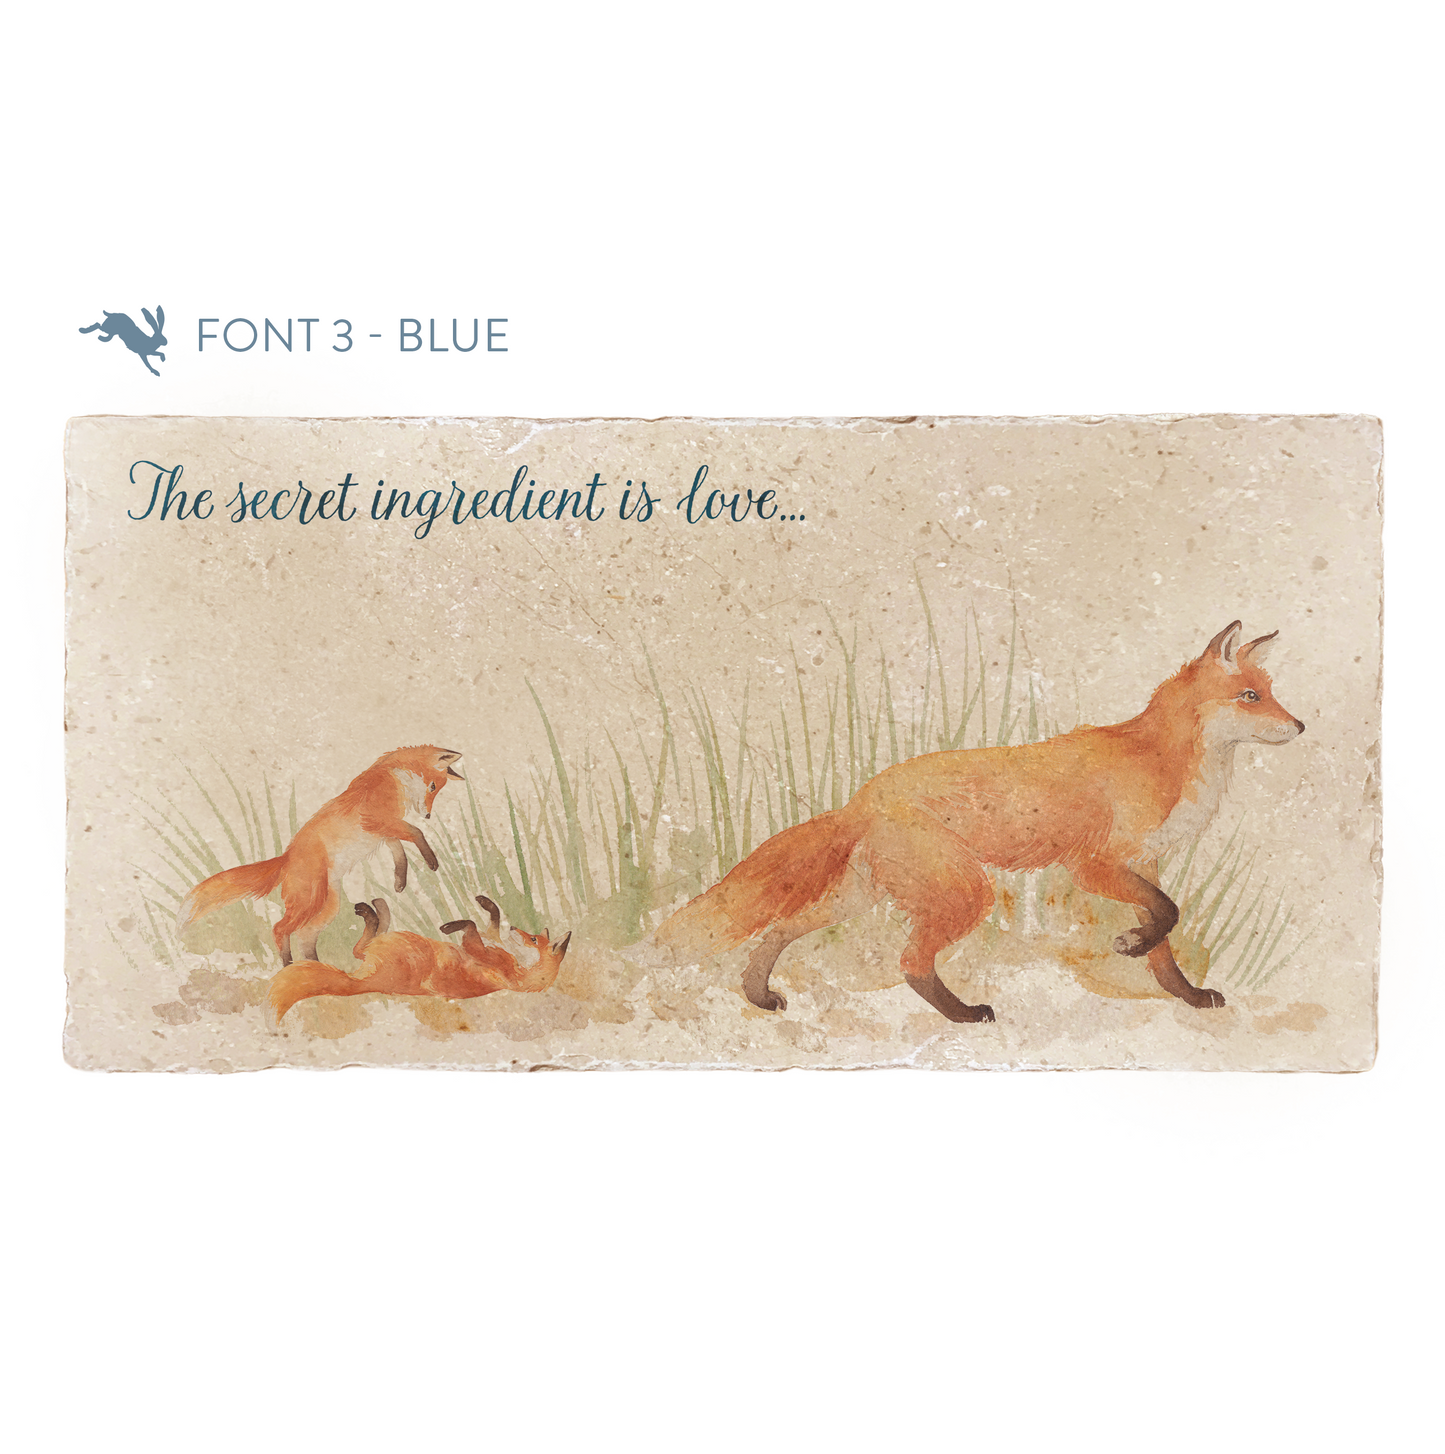 A personalised rectangular marble sharing platter featuring a fox design. The example personalised dark blue text reads 'The secret ingredient is love' in a modern script font.